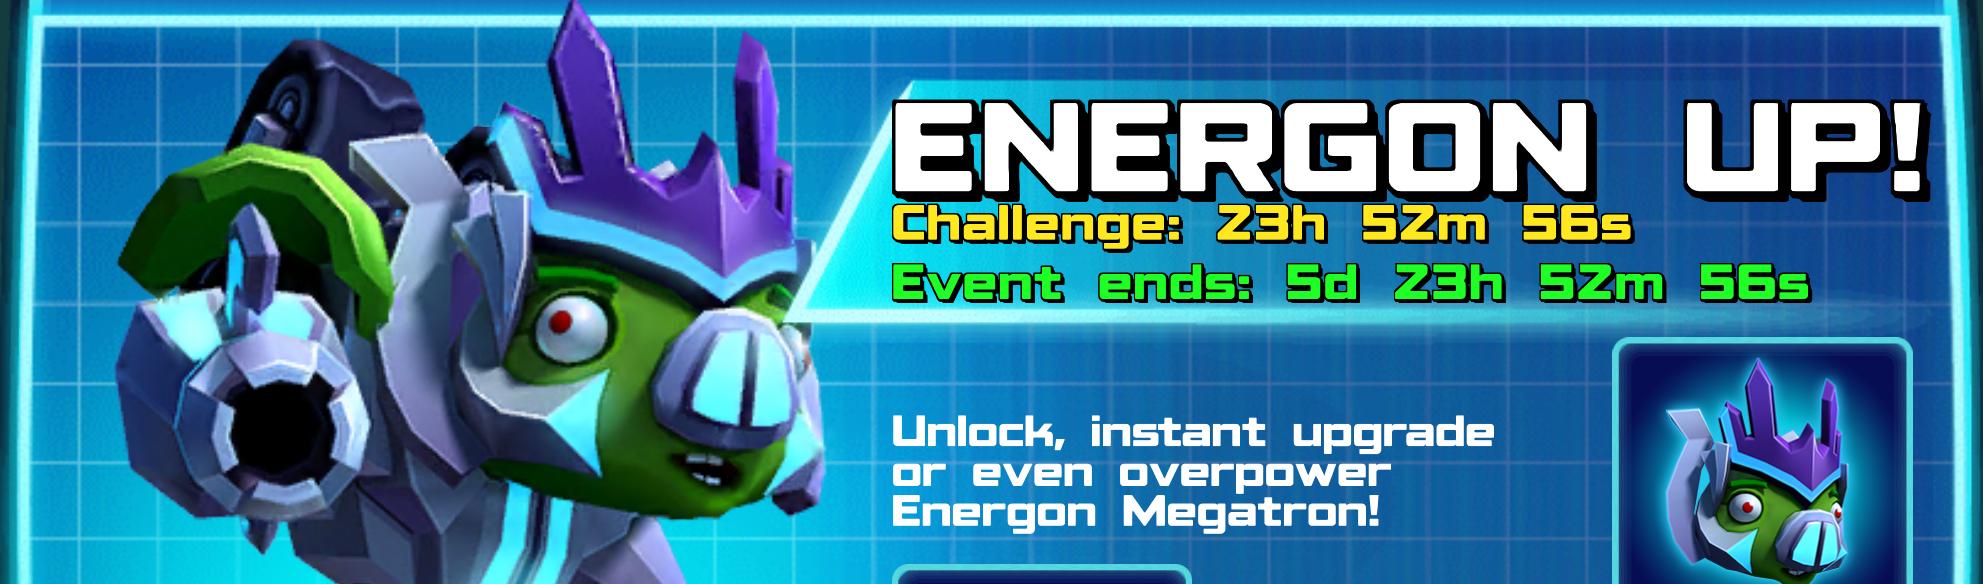 (Part of) The event banner for Energon Megatron